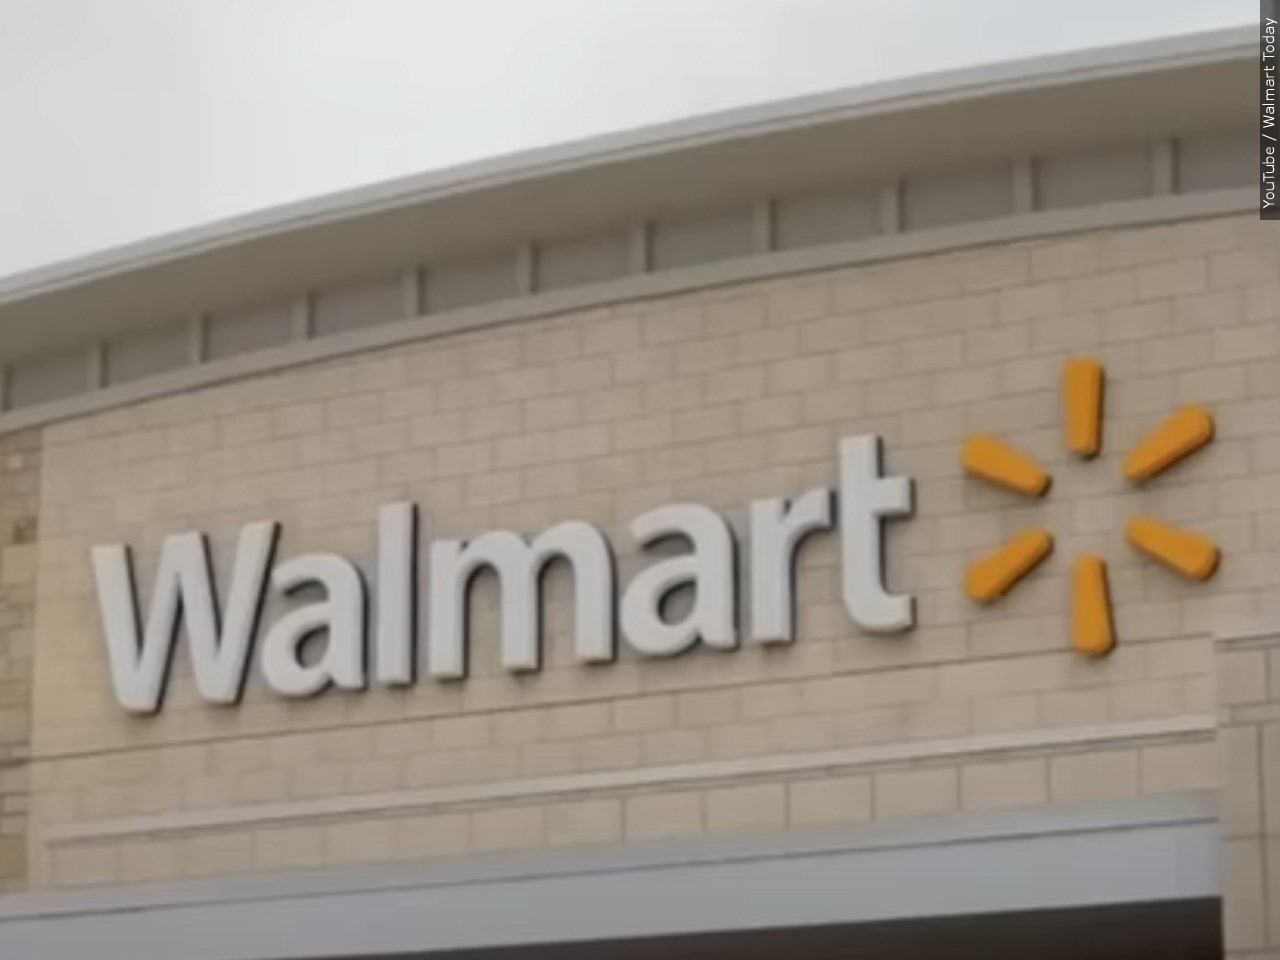 Walmart 'sensory-friendly' hours to start Friday at stores nationwide